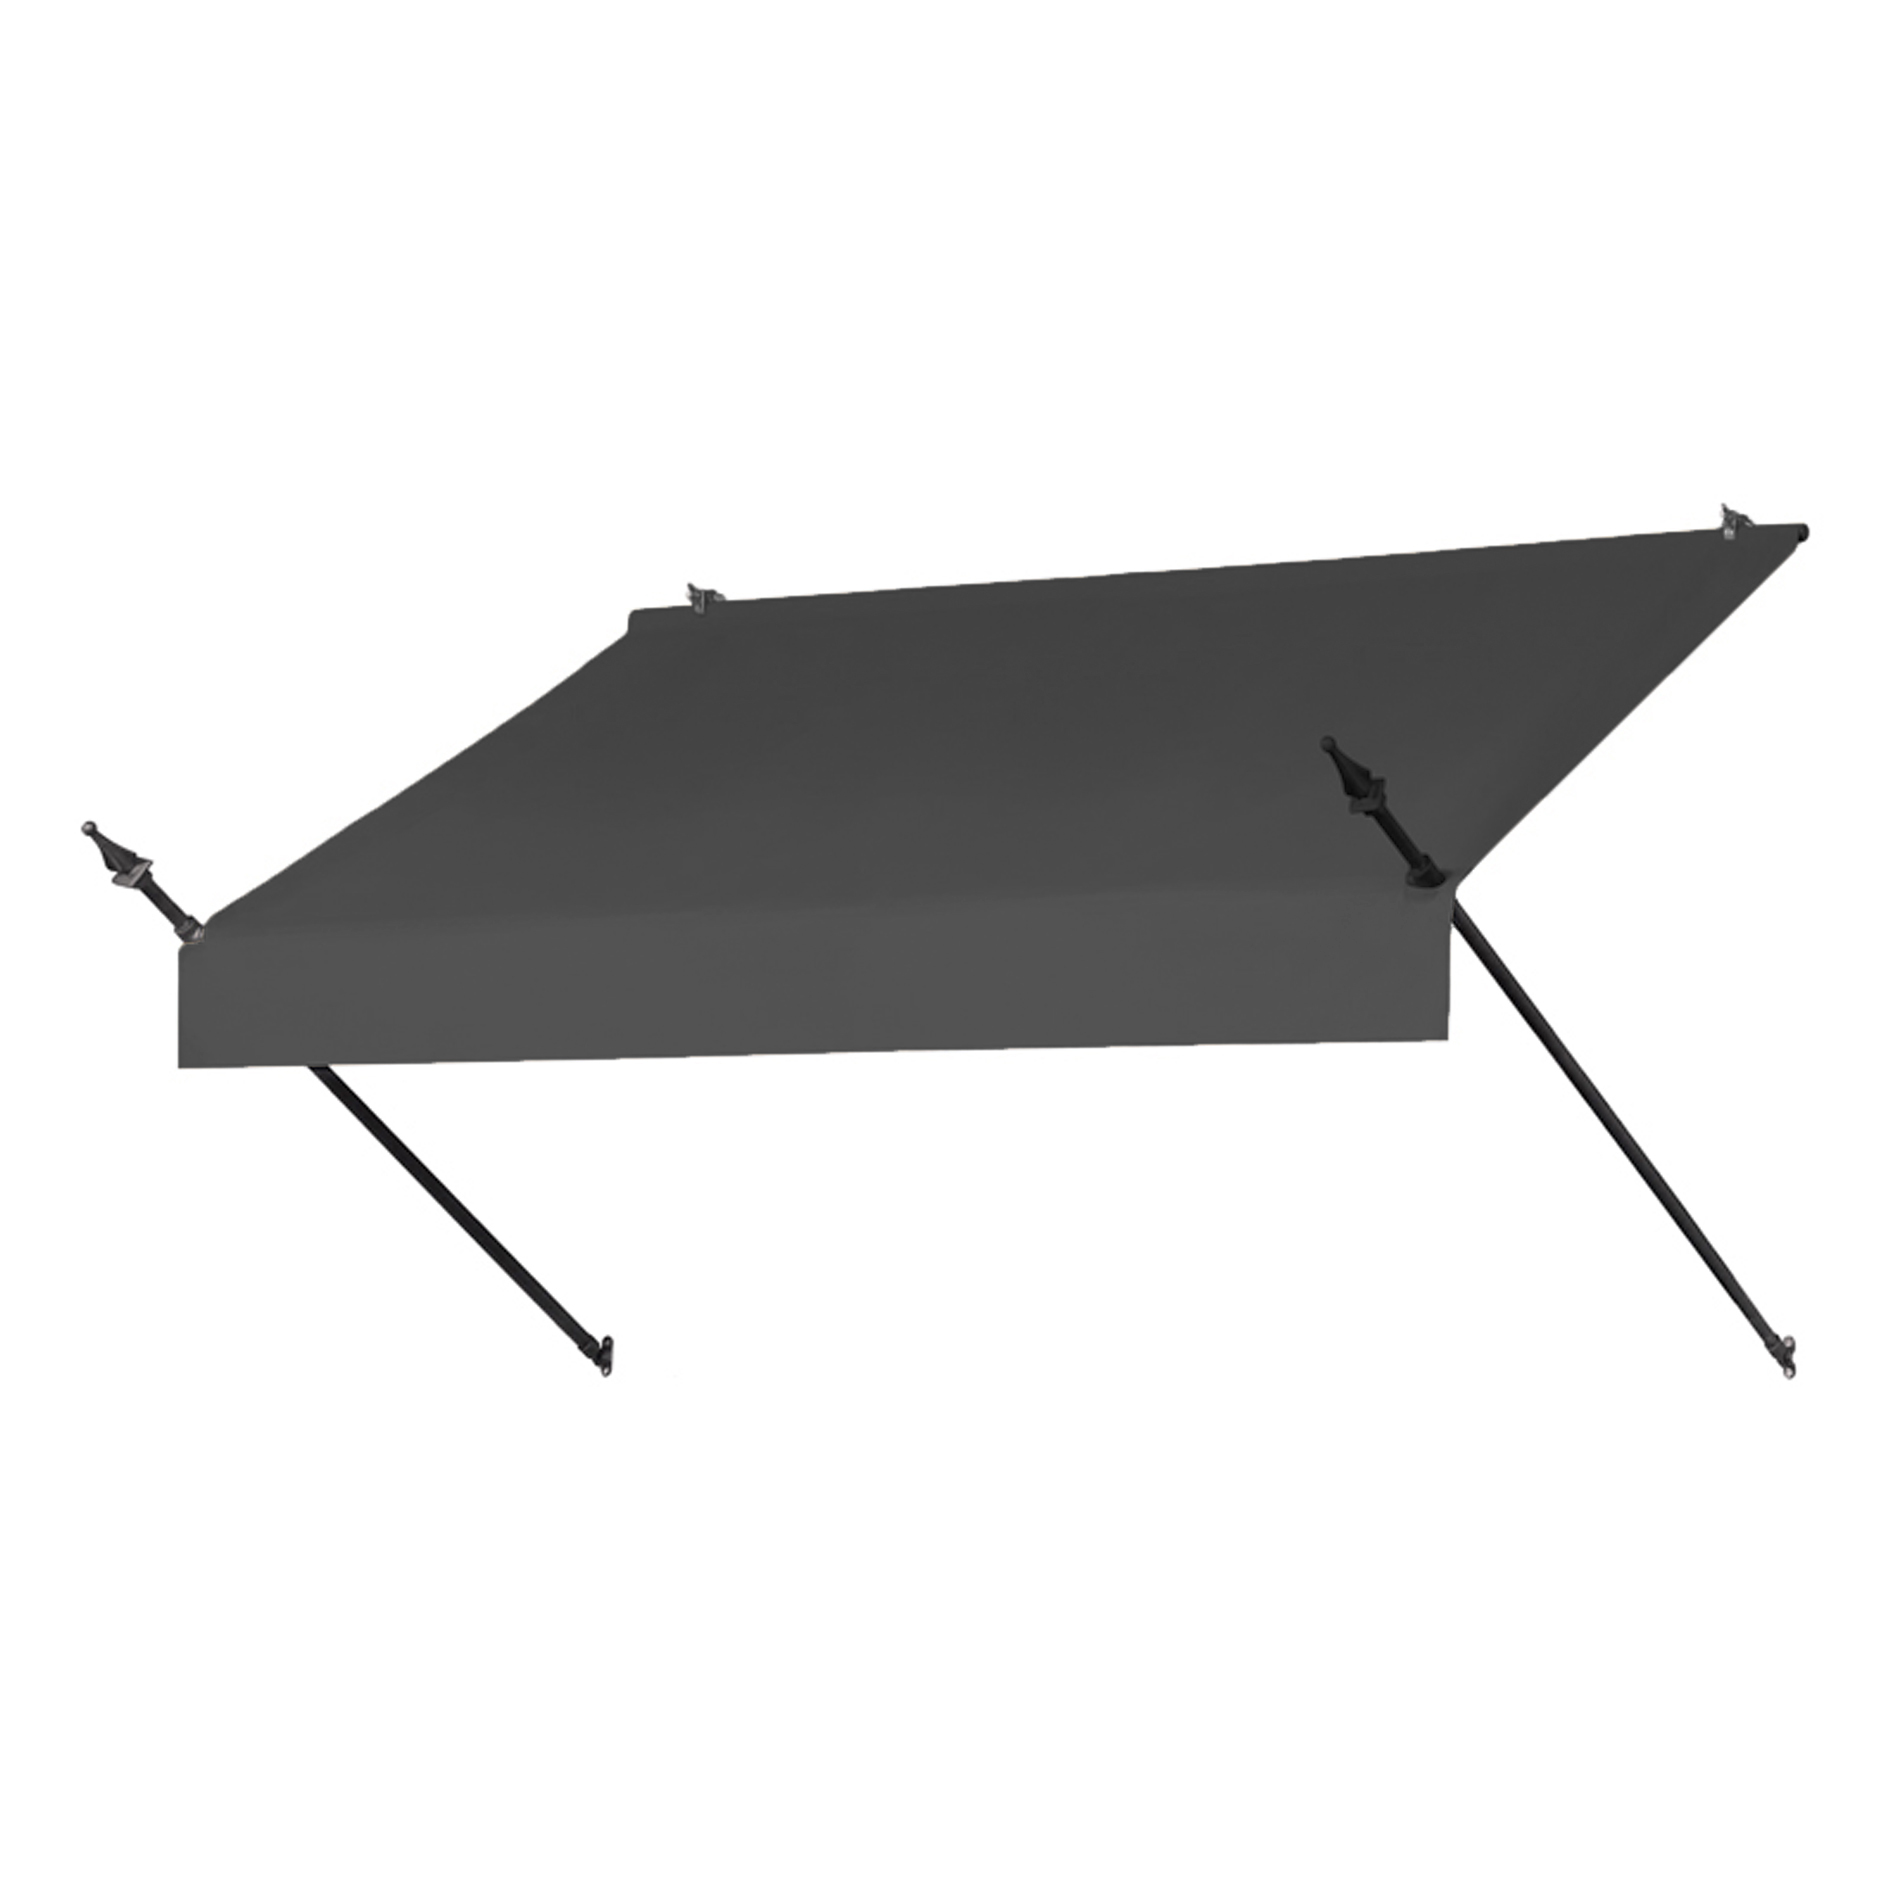 6' Designer Awnings in a Box Charcoal Gray